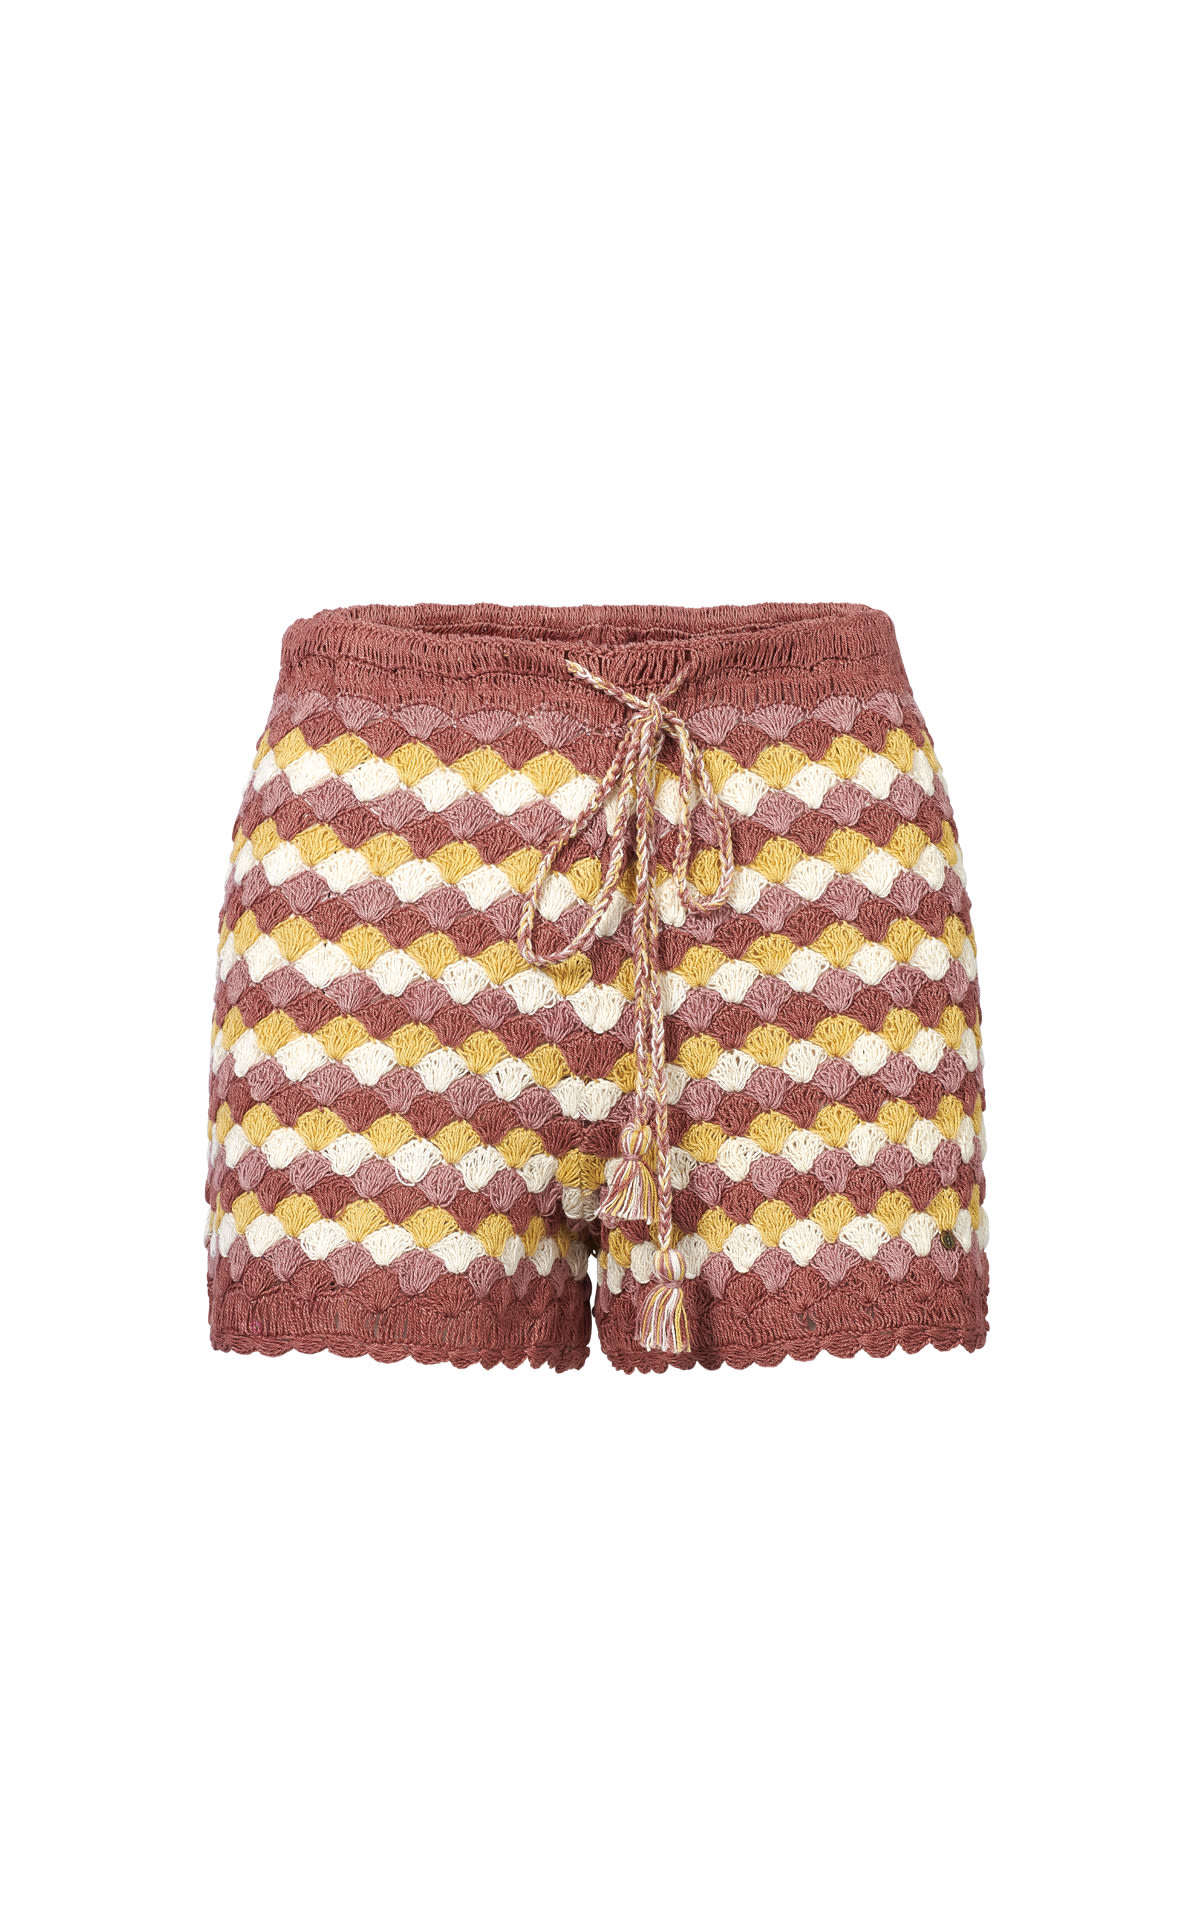 Colorful crochet shorts Brownie